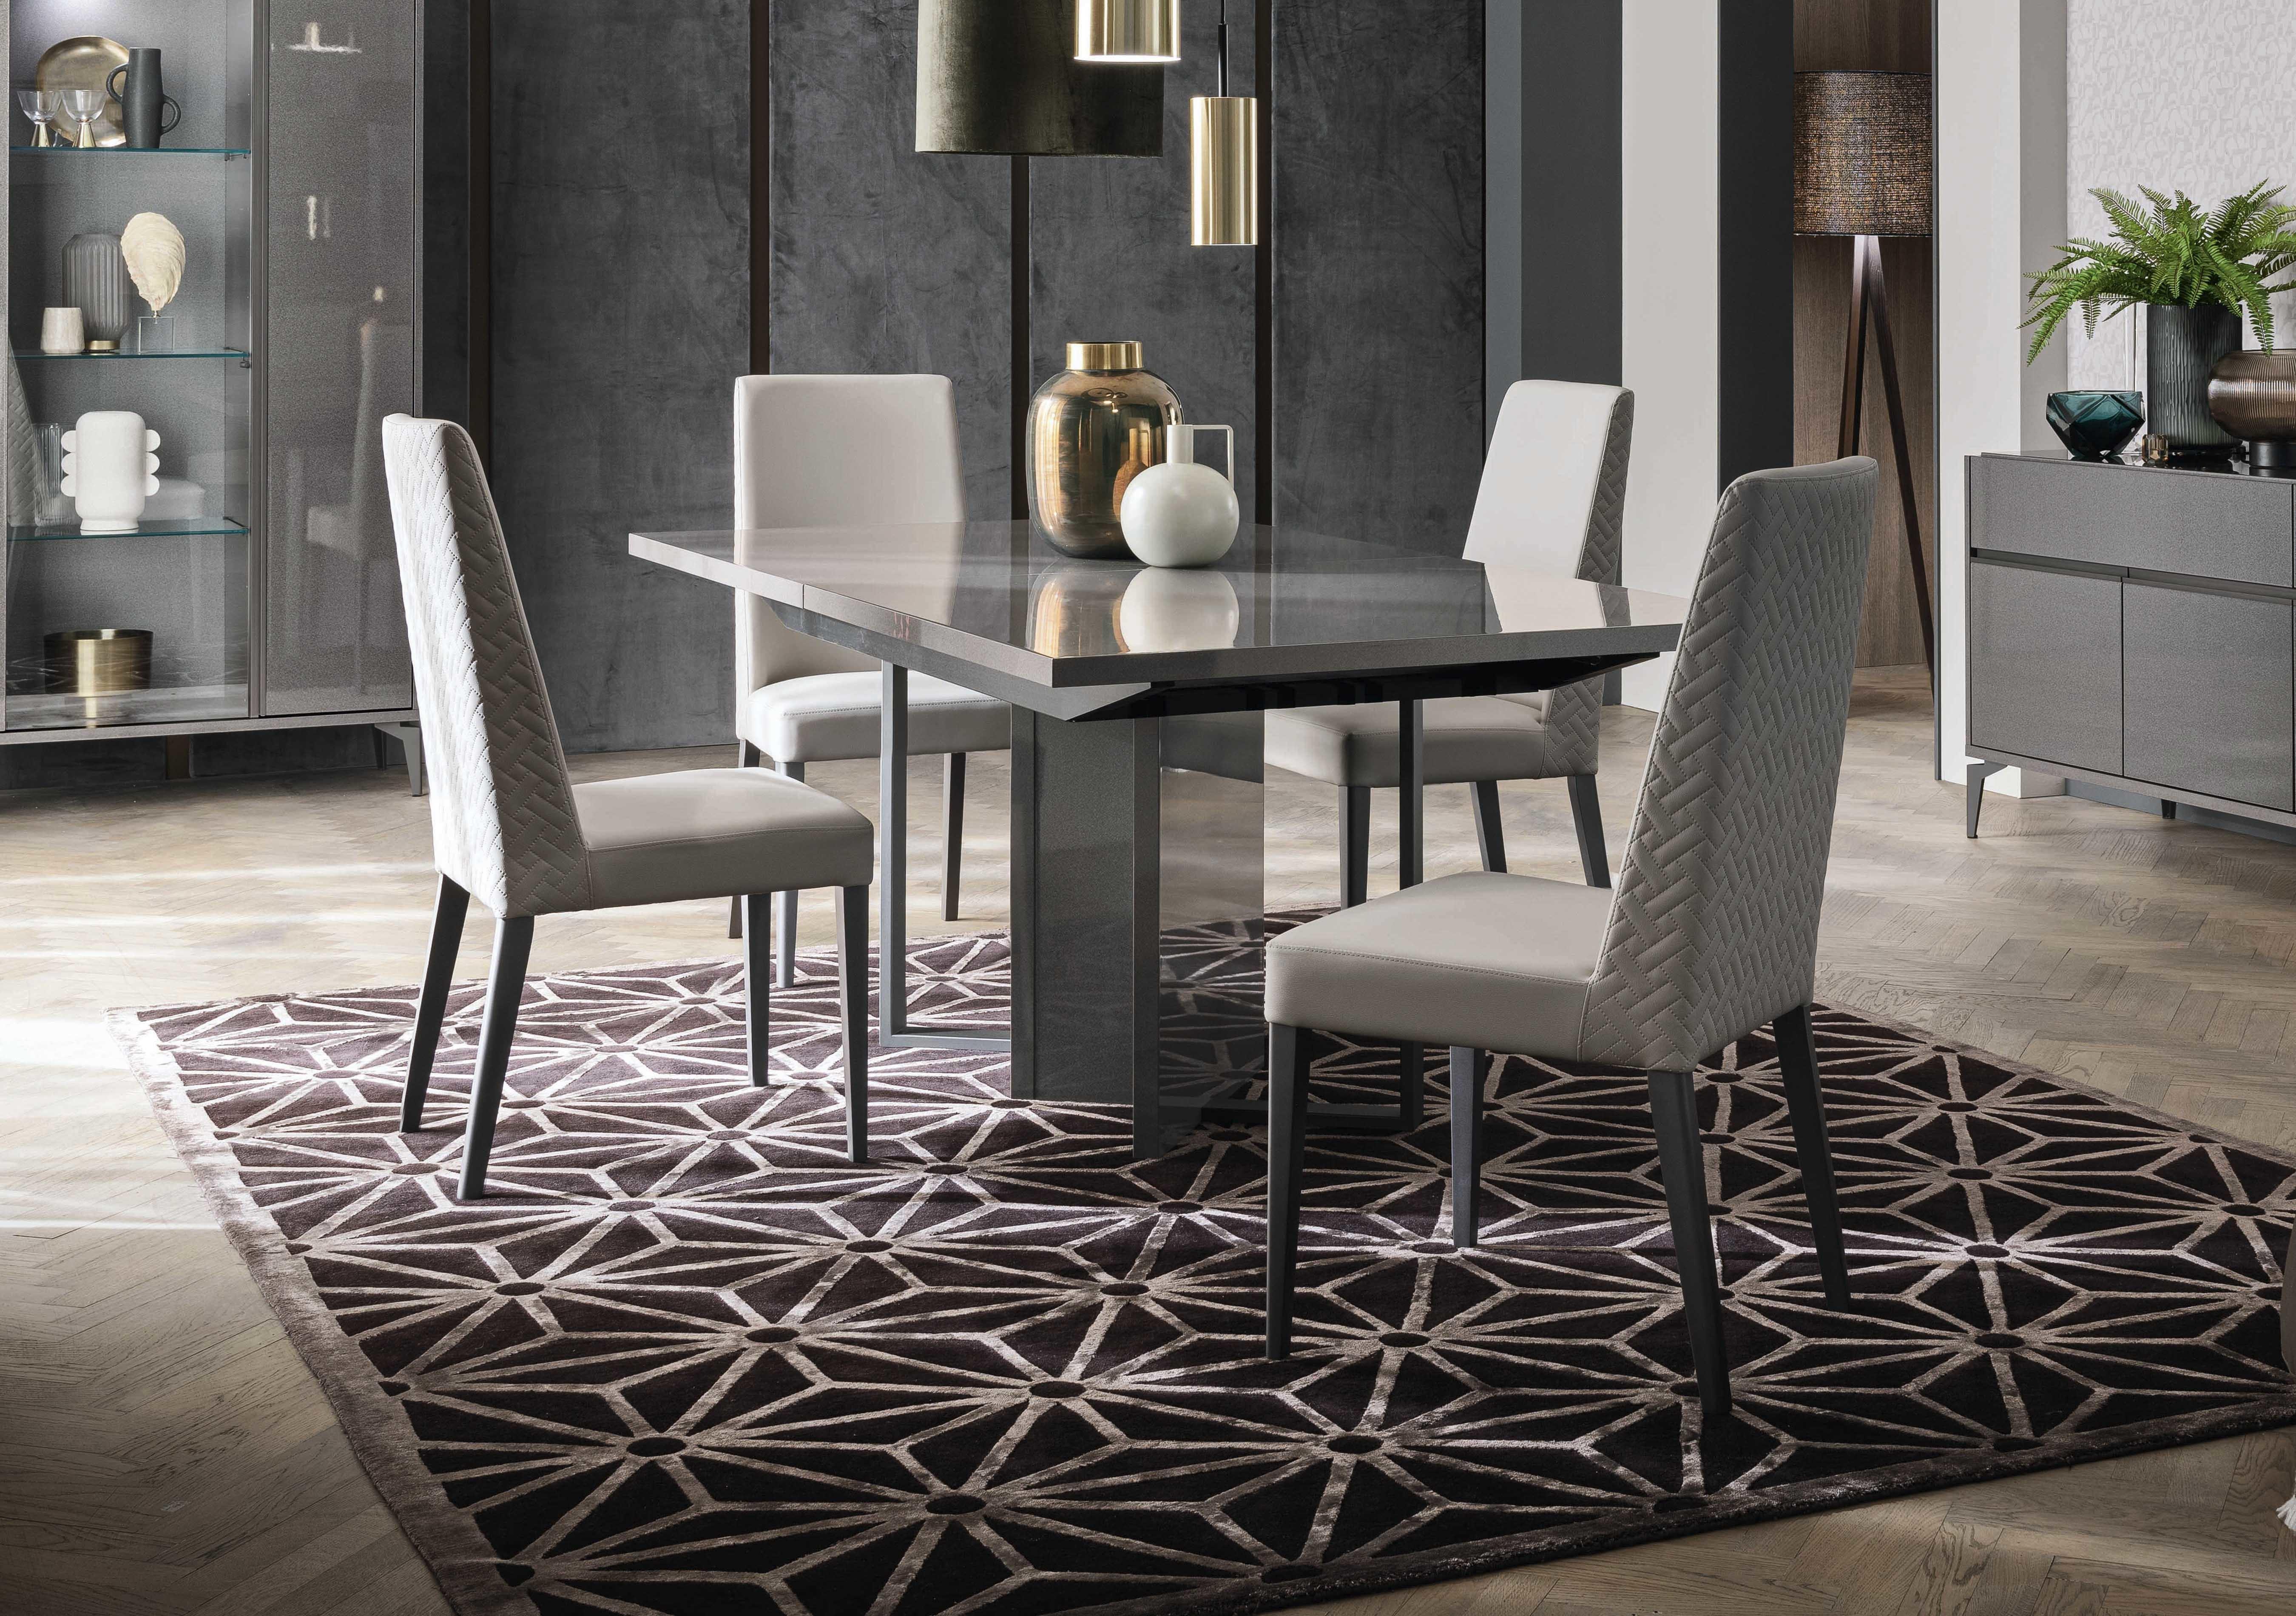 Cristina Large Extending Dining Table and 4 Dining Chairs Dining Set in  on Furniture Village